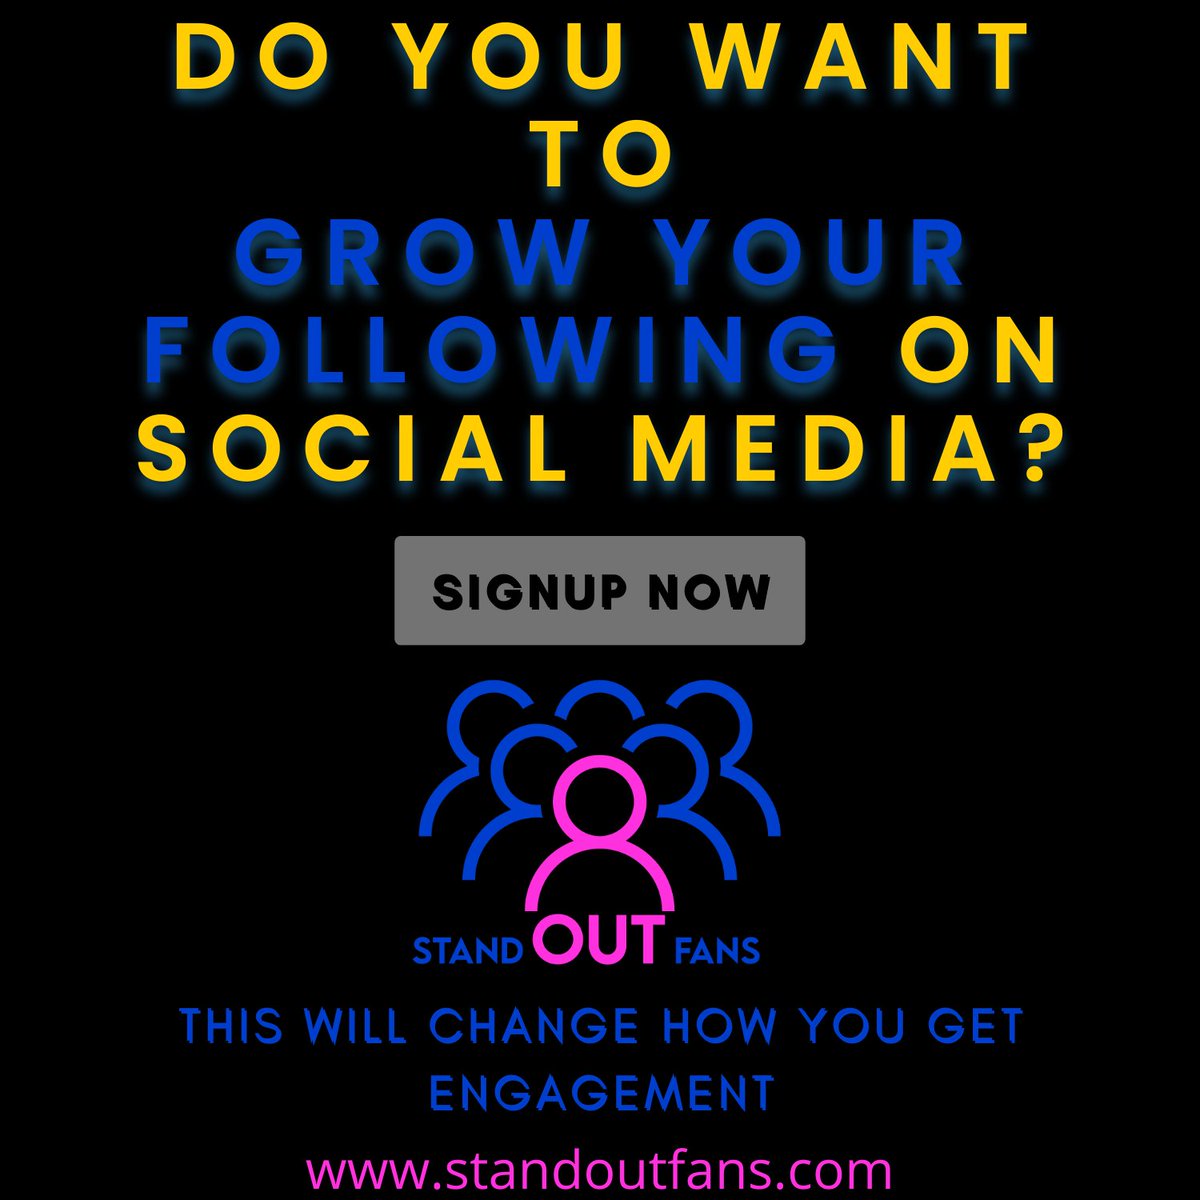 Let's work together to generate more engagement, with the only platform you need to boost your Business online,
.
.
.
.
#contentmarketing #contentcreator #ContentCreation #contentmarketingtips #contentisking #contentcreators #contentmarketer #contentcuration #contentcurator